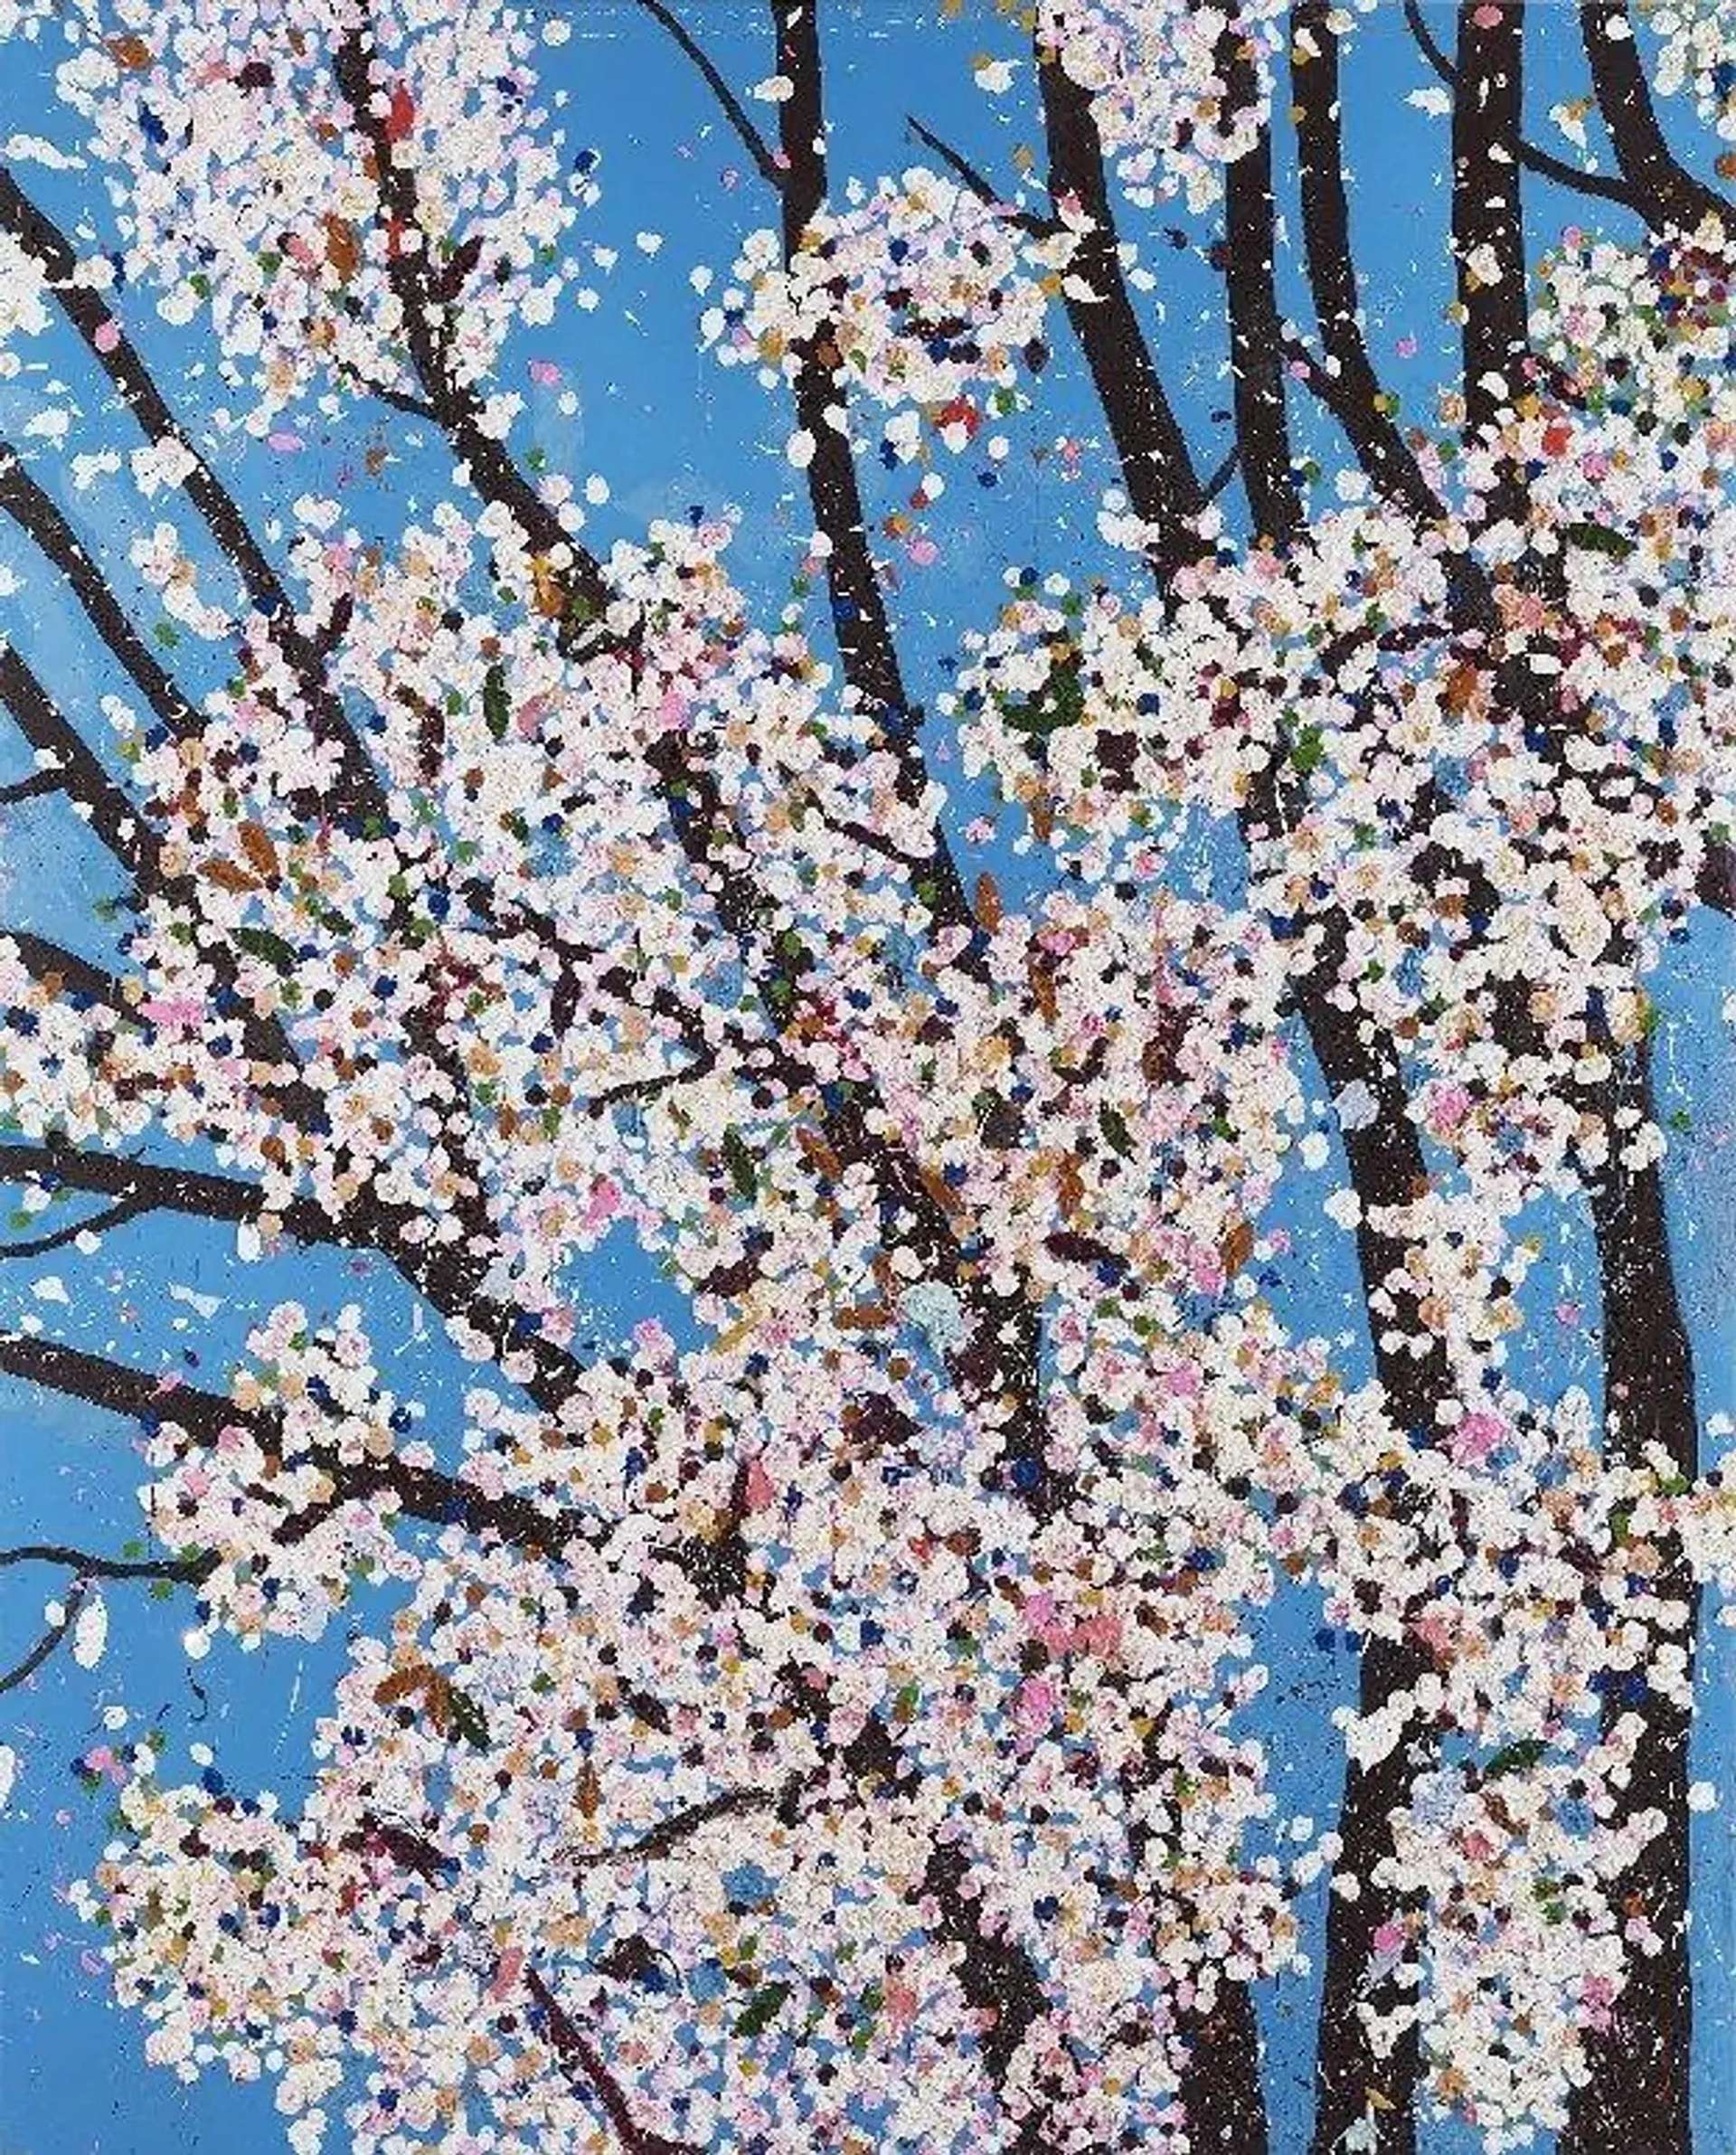 The print depicts a beautiful array of cherry blossoms in full bloom. The blossoms are rendered in light pink tones against a vibrant blue background. The soft pinks contrast with the blue sky, drawing attention to the natural beauty of the flowers.